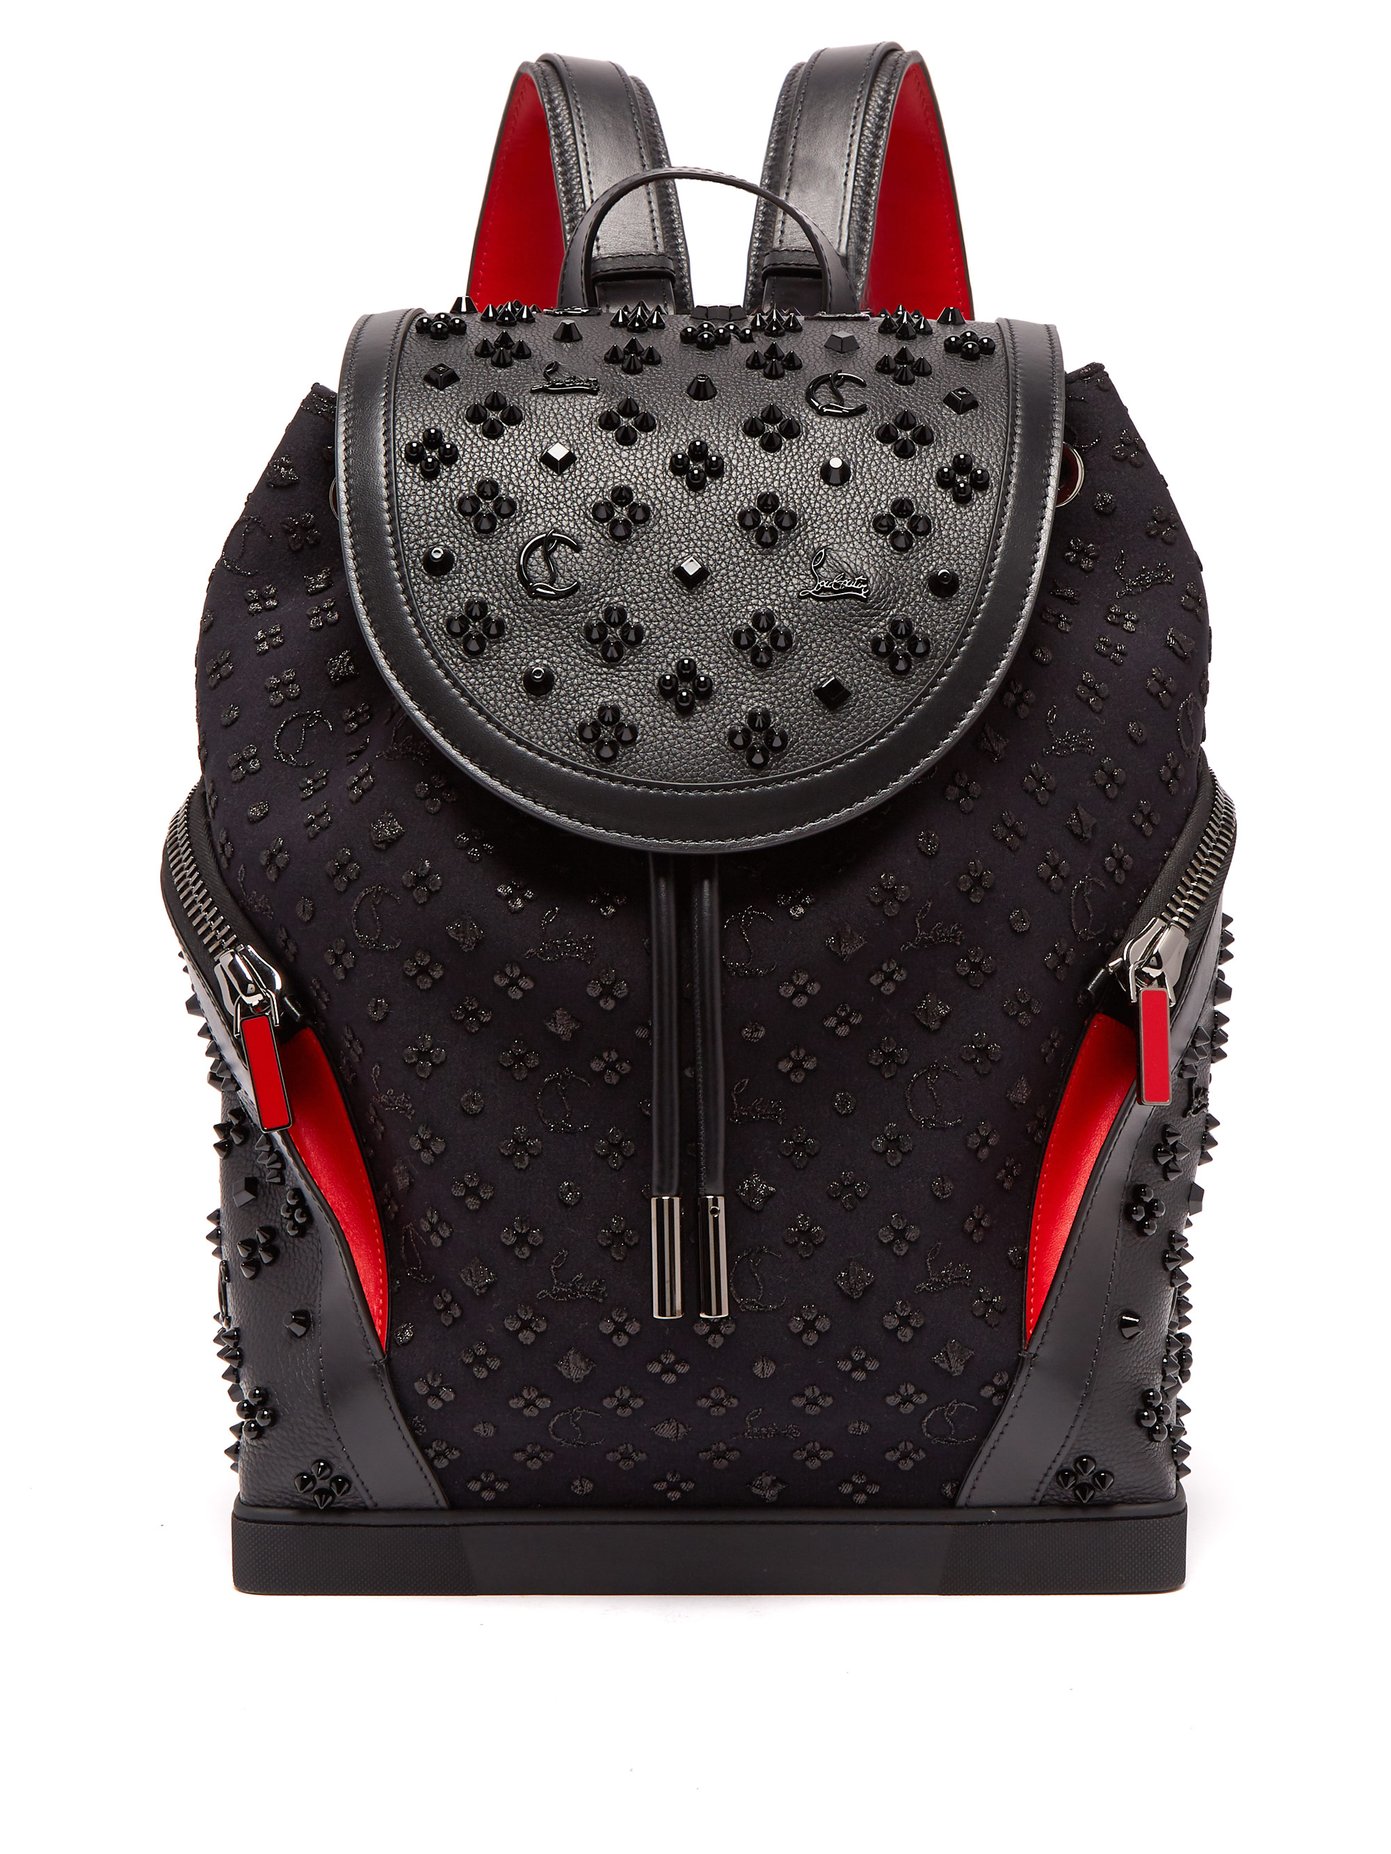 Explorafunk studded leather backpack 